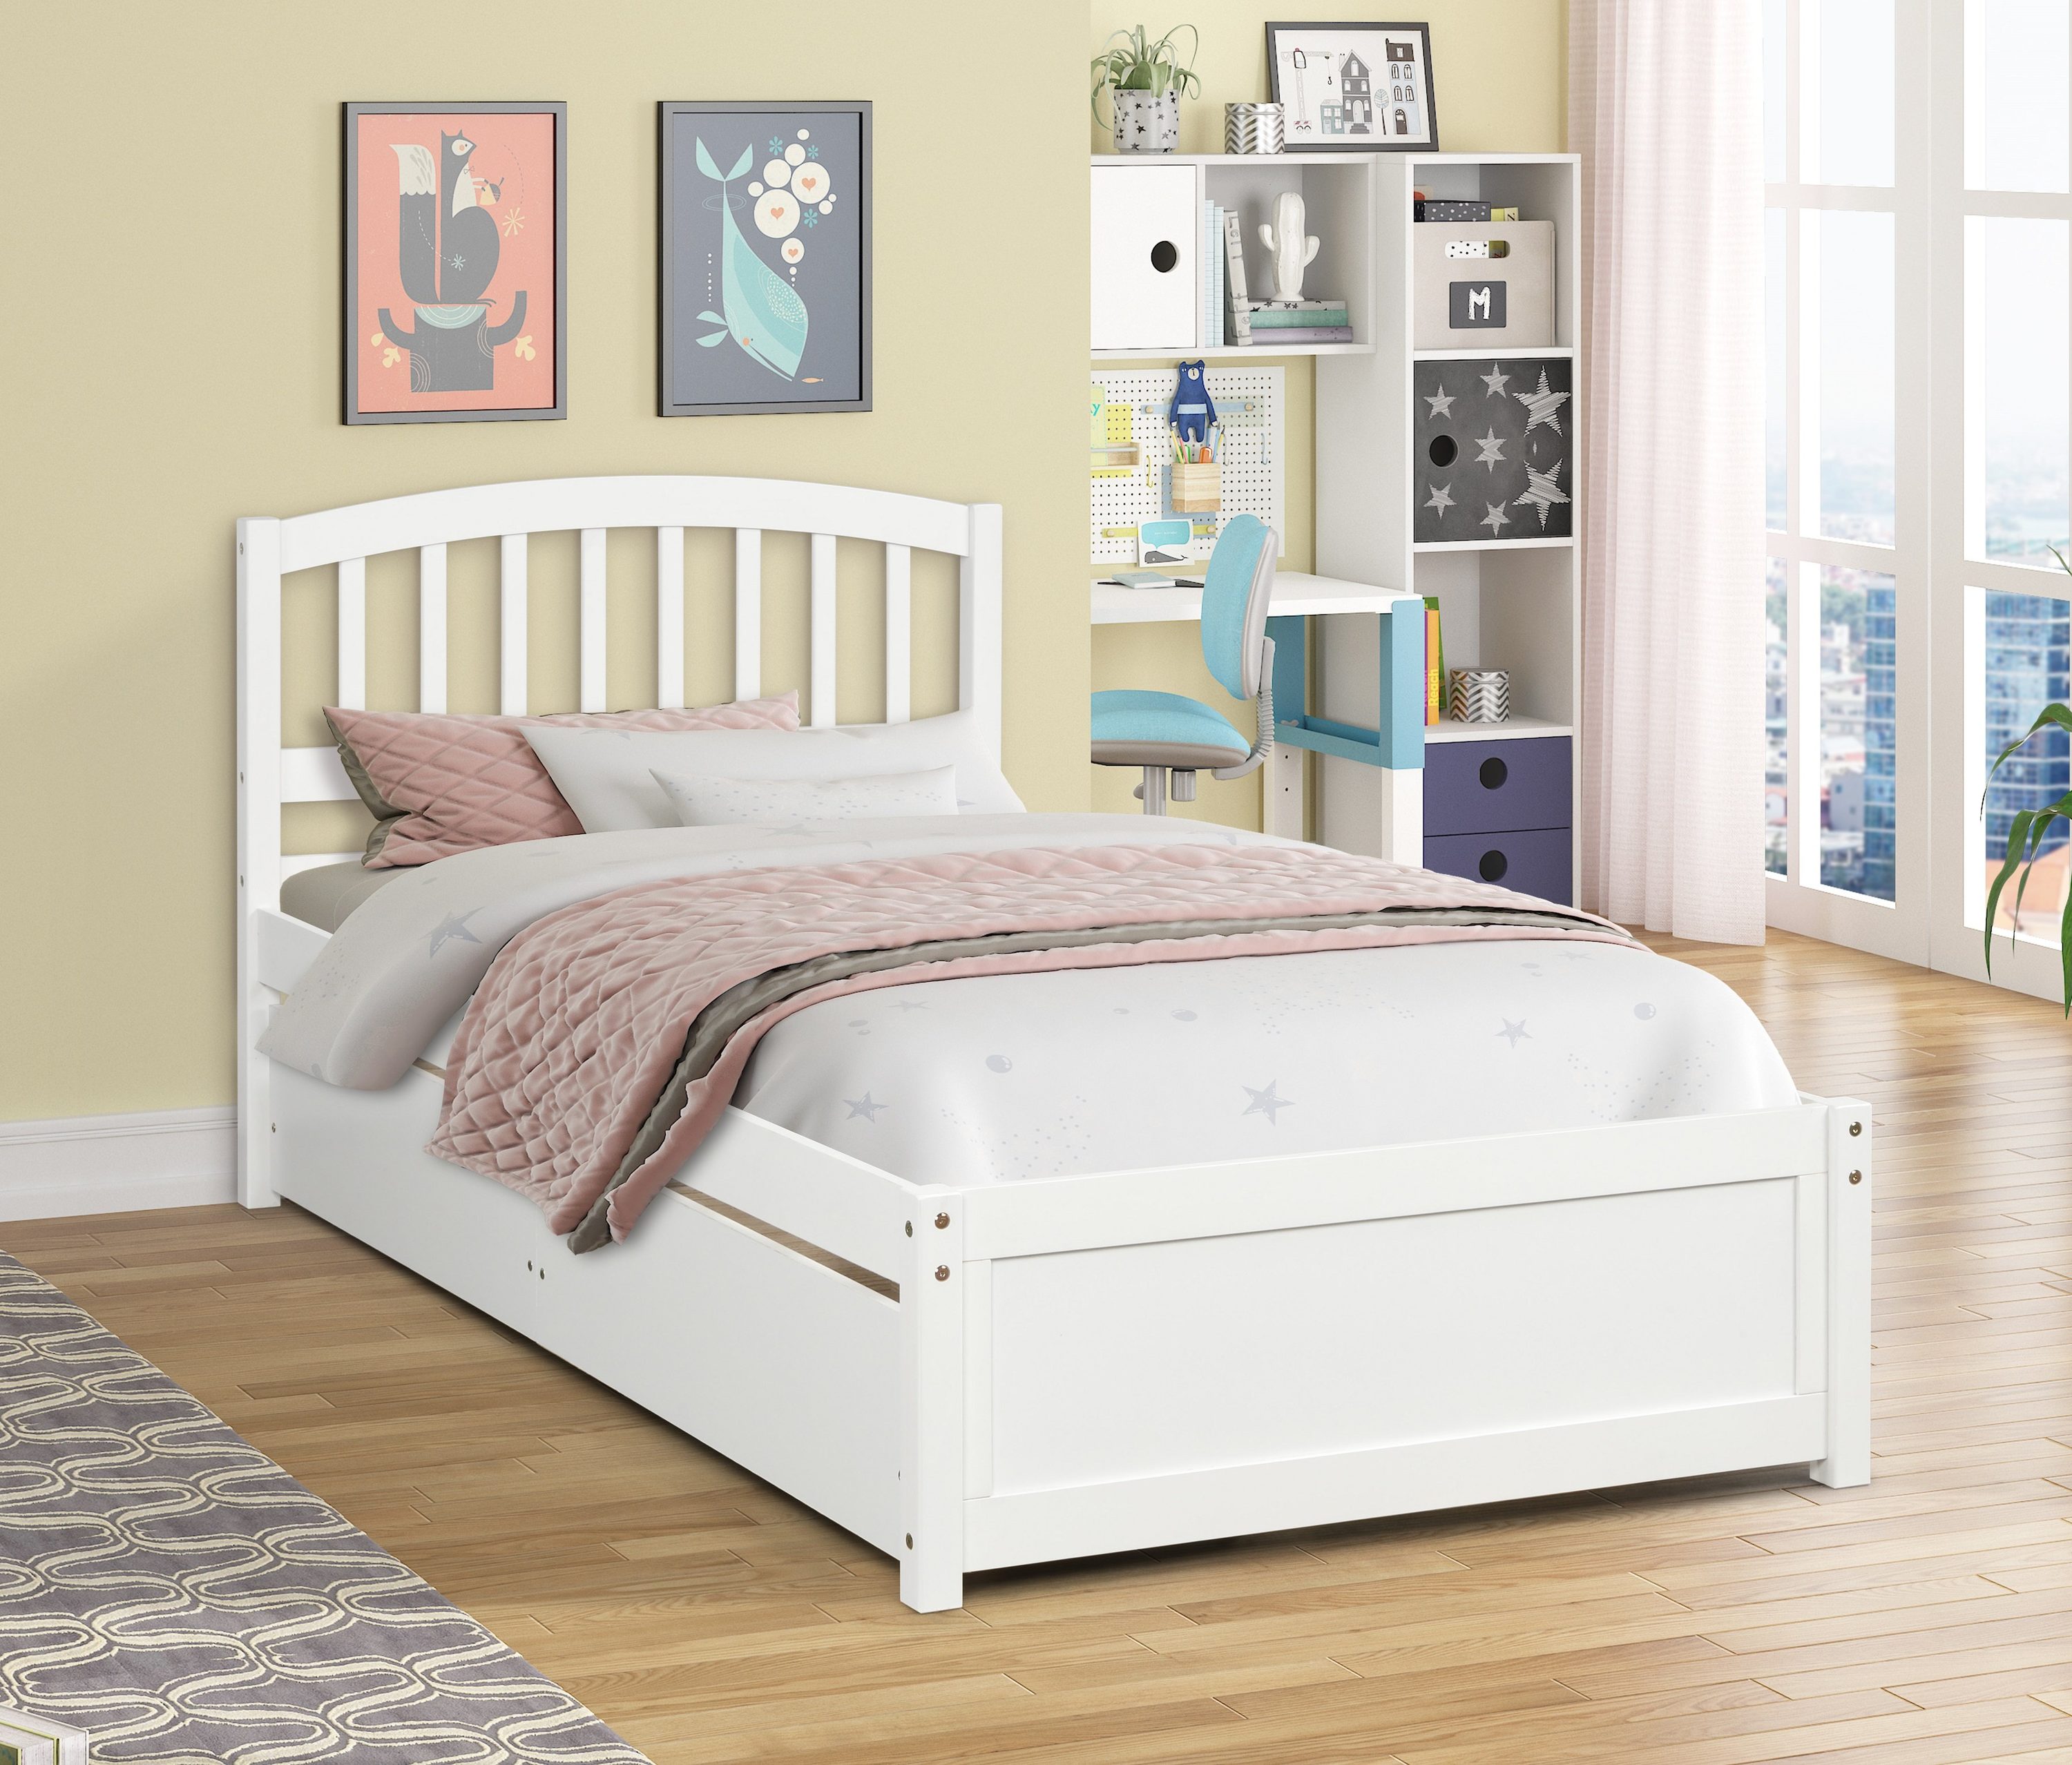 Wood platform bed with two drawers Twin/Full Size Bed Frame With Headboard White 